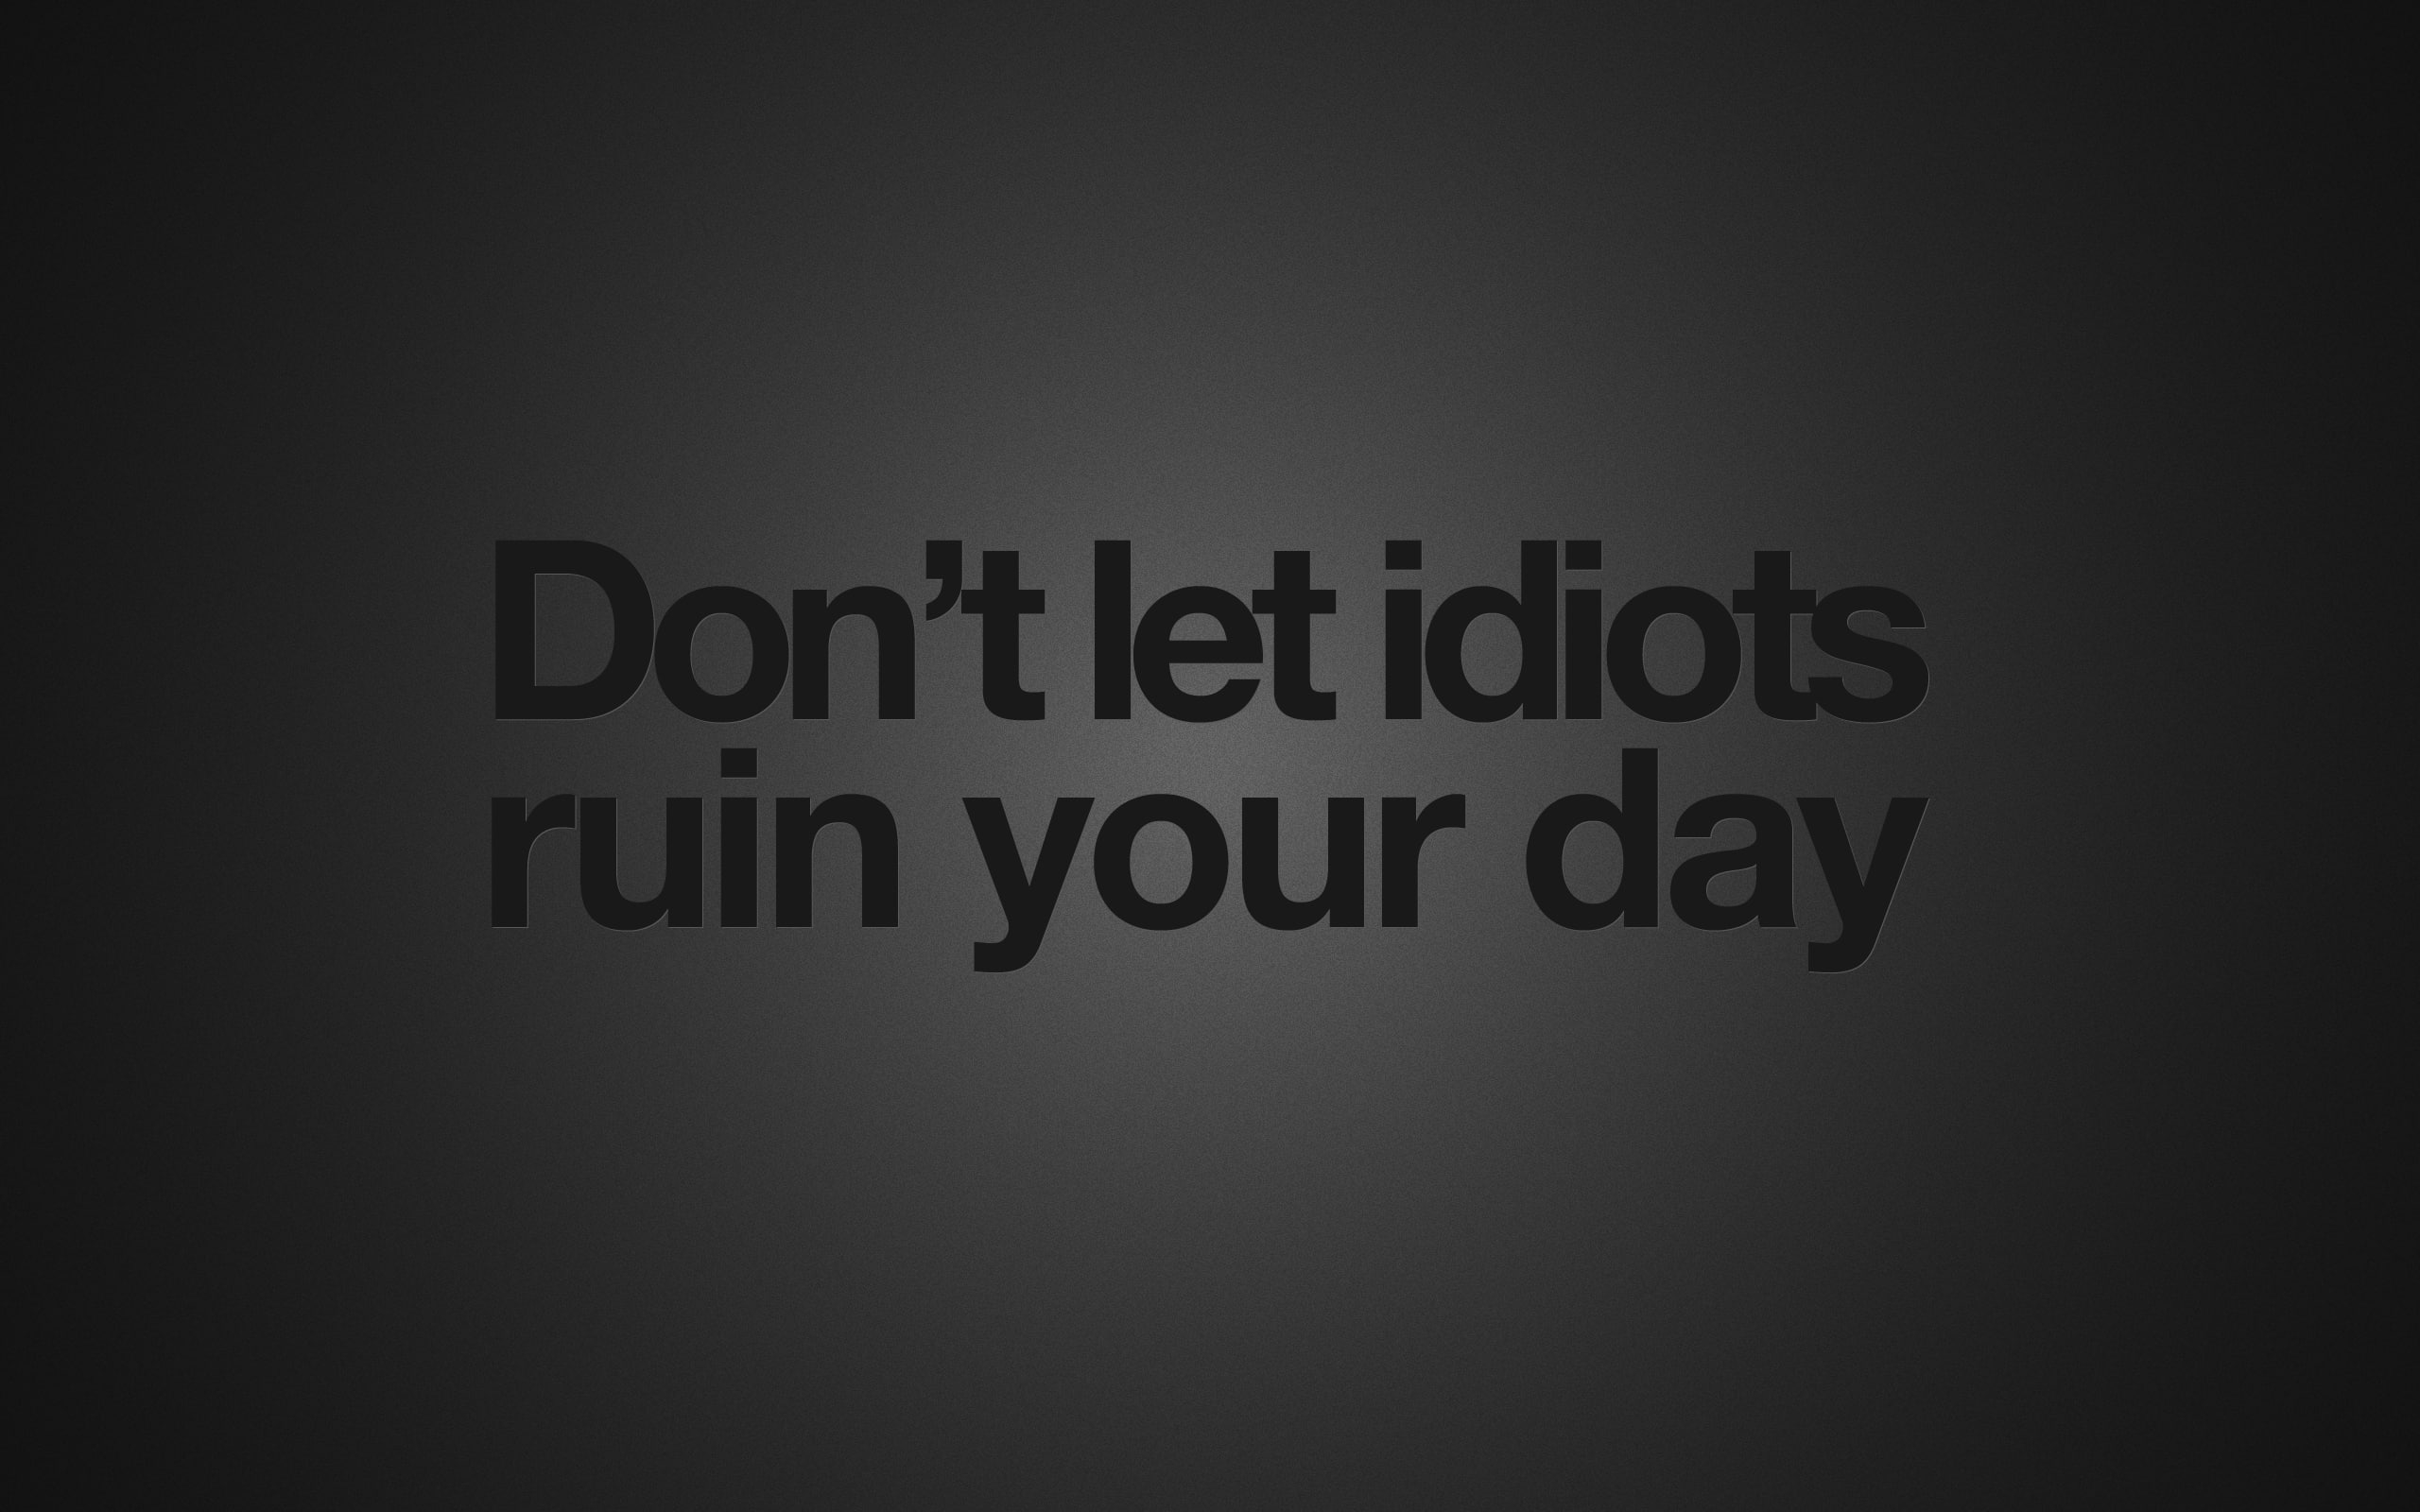 Wallpaper don't let idiots ruin your day text, quote, humor, minimalism